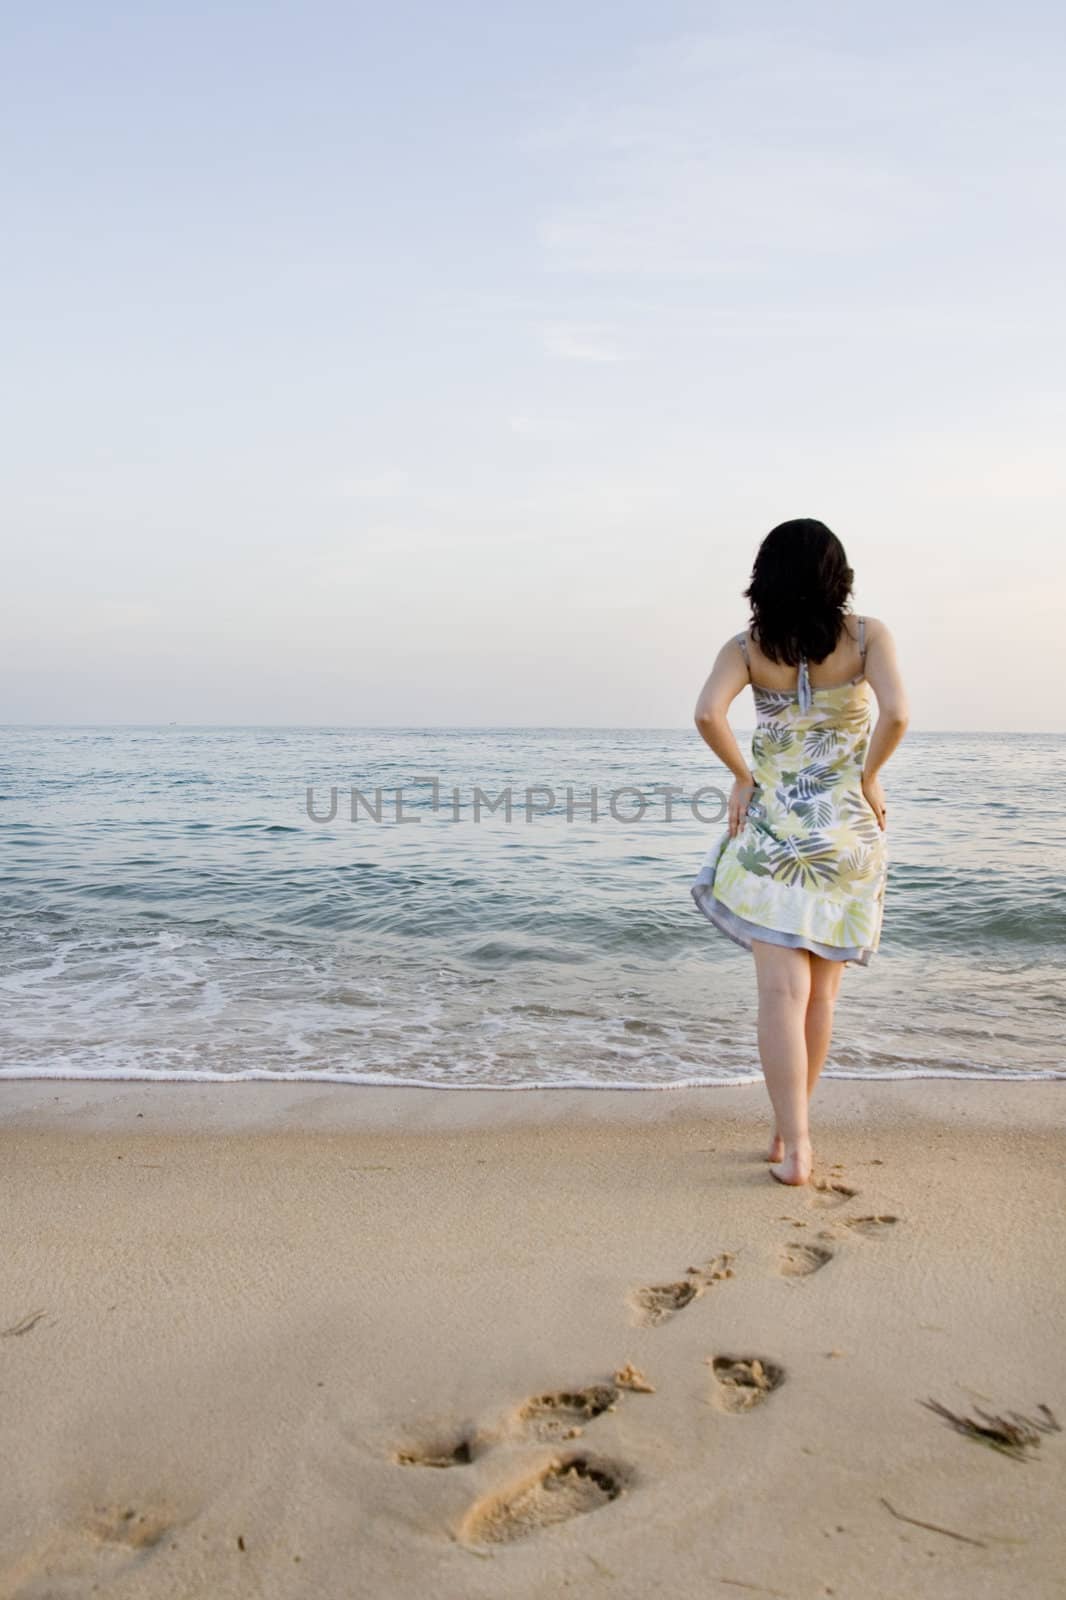 Young woman with dress tries the water on a beach.